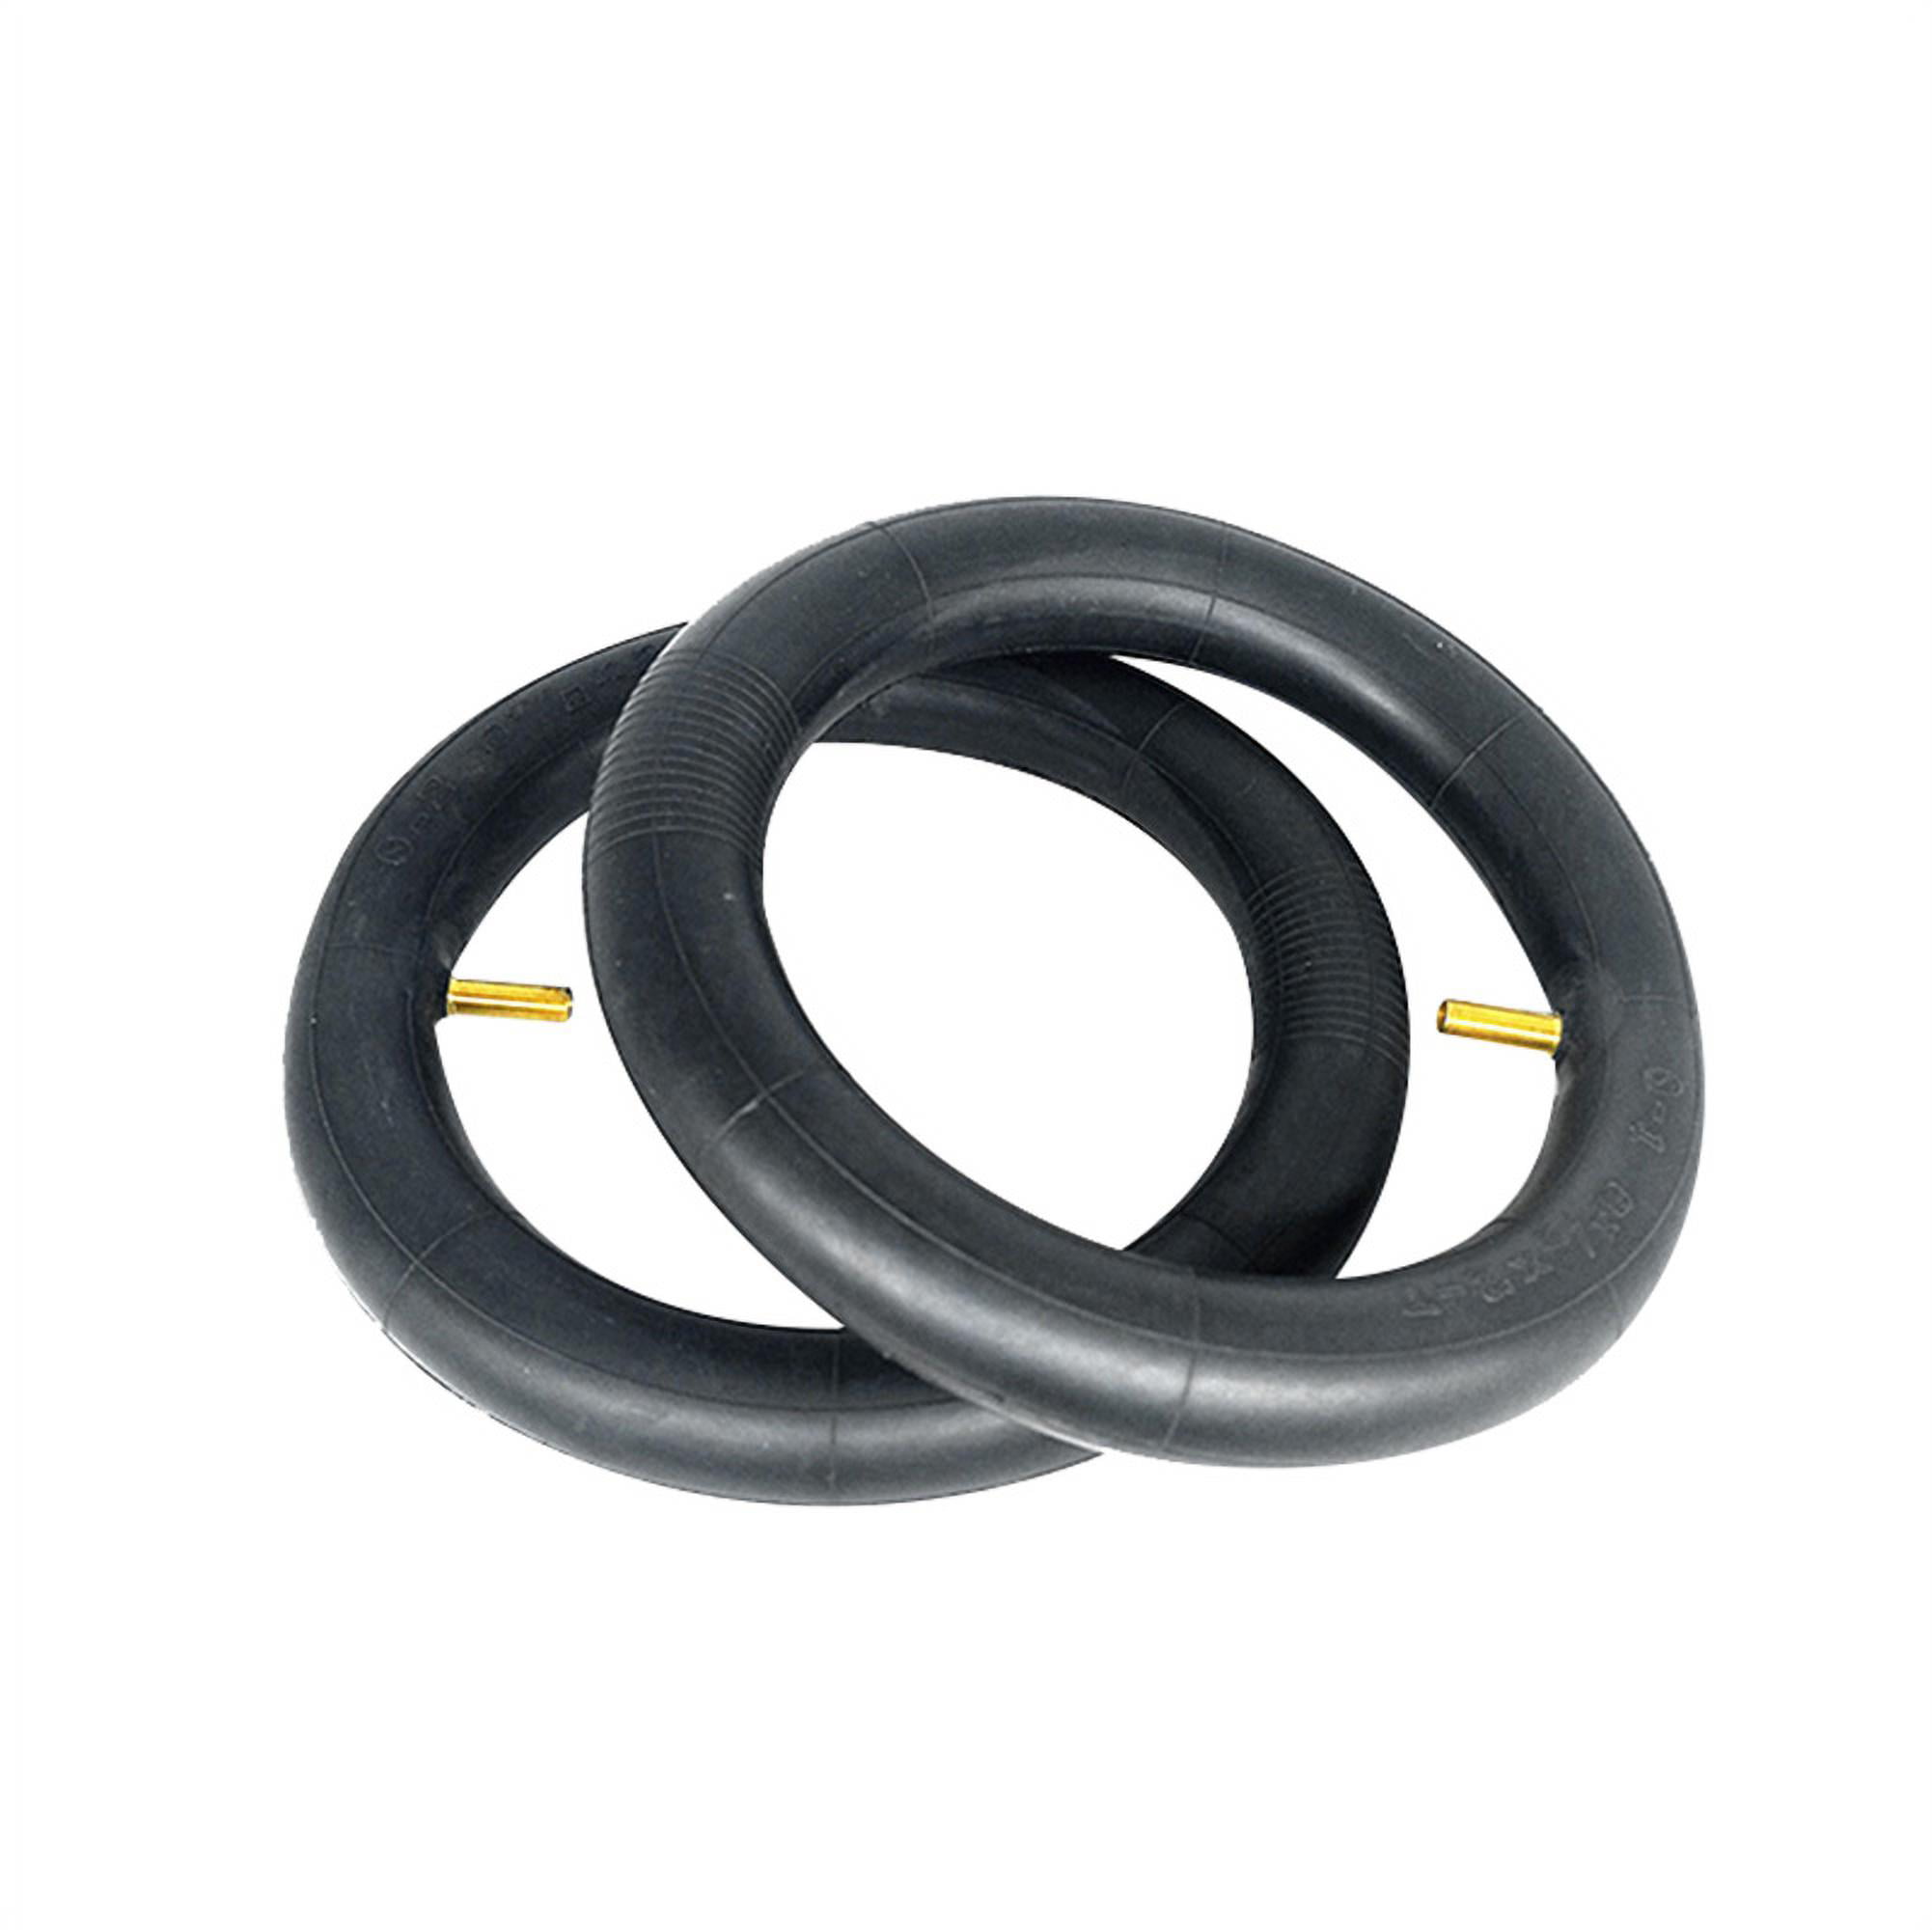 1Pcs 2Pcs Inner Tubes Pneumatic Thickened Tires for Xiaomi Mijia M365 U9S9 